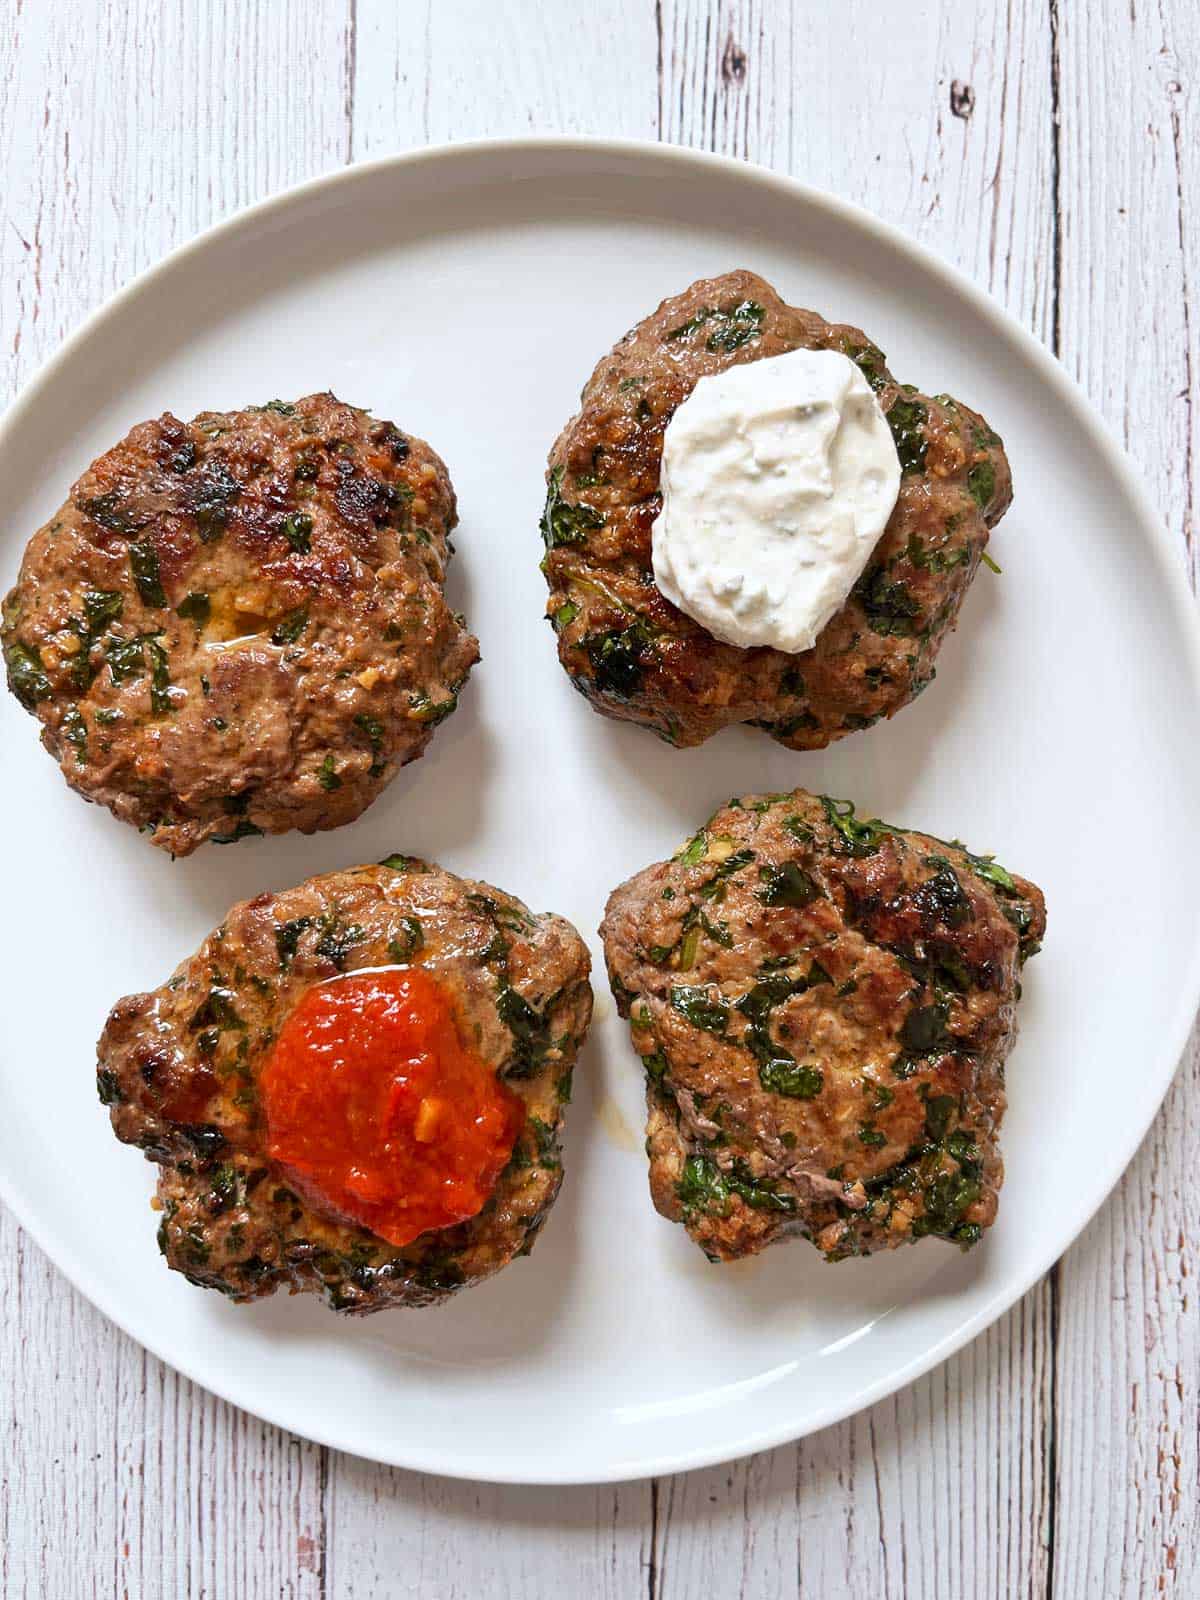 Lamb burgers are topped with a yogurt sauce and with harissa.